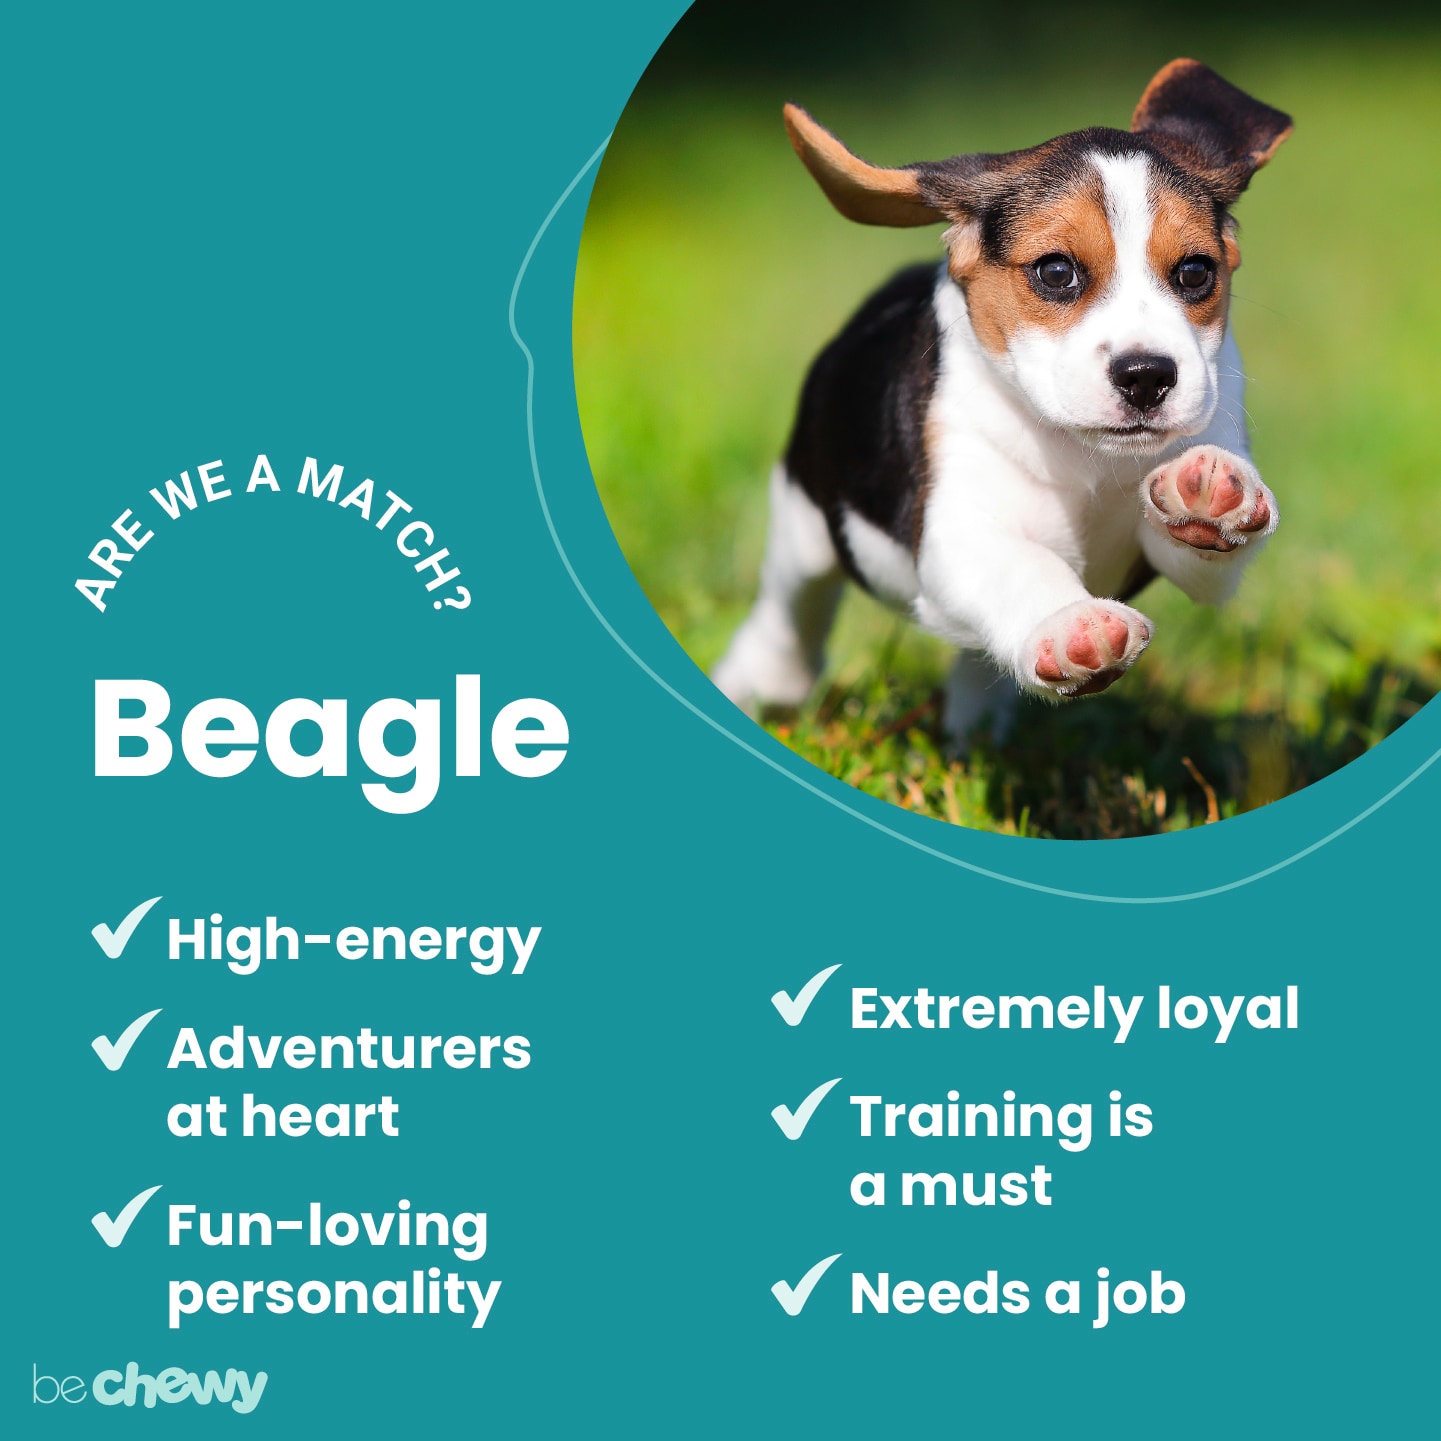 what are the personality traits of a beagle? 2